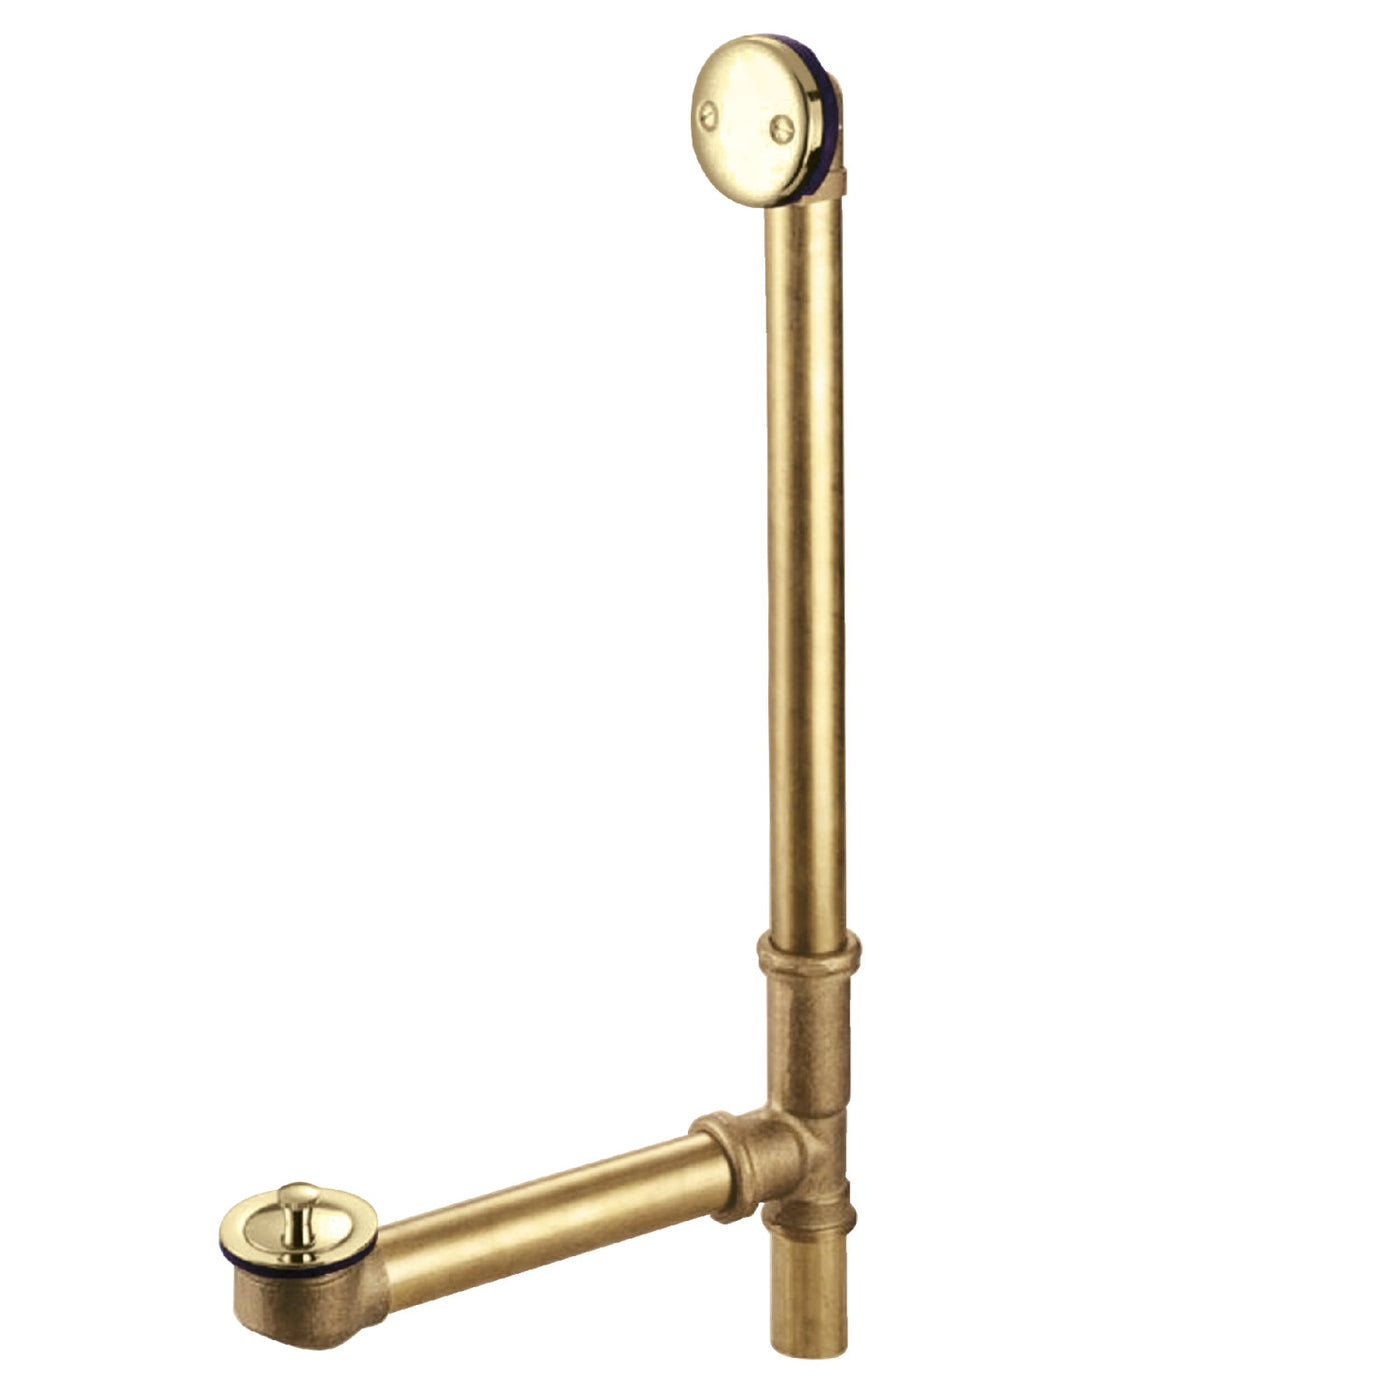 Elements of Design EDLL3182 23-Inch Lift and Turn Tub Waste and Overflow, 20 Gauge, Polished Brass